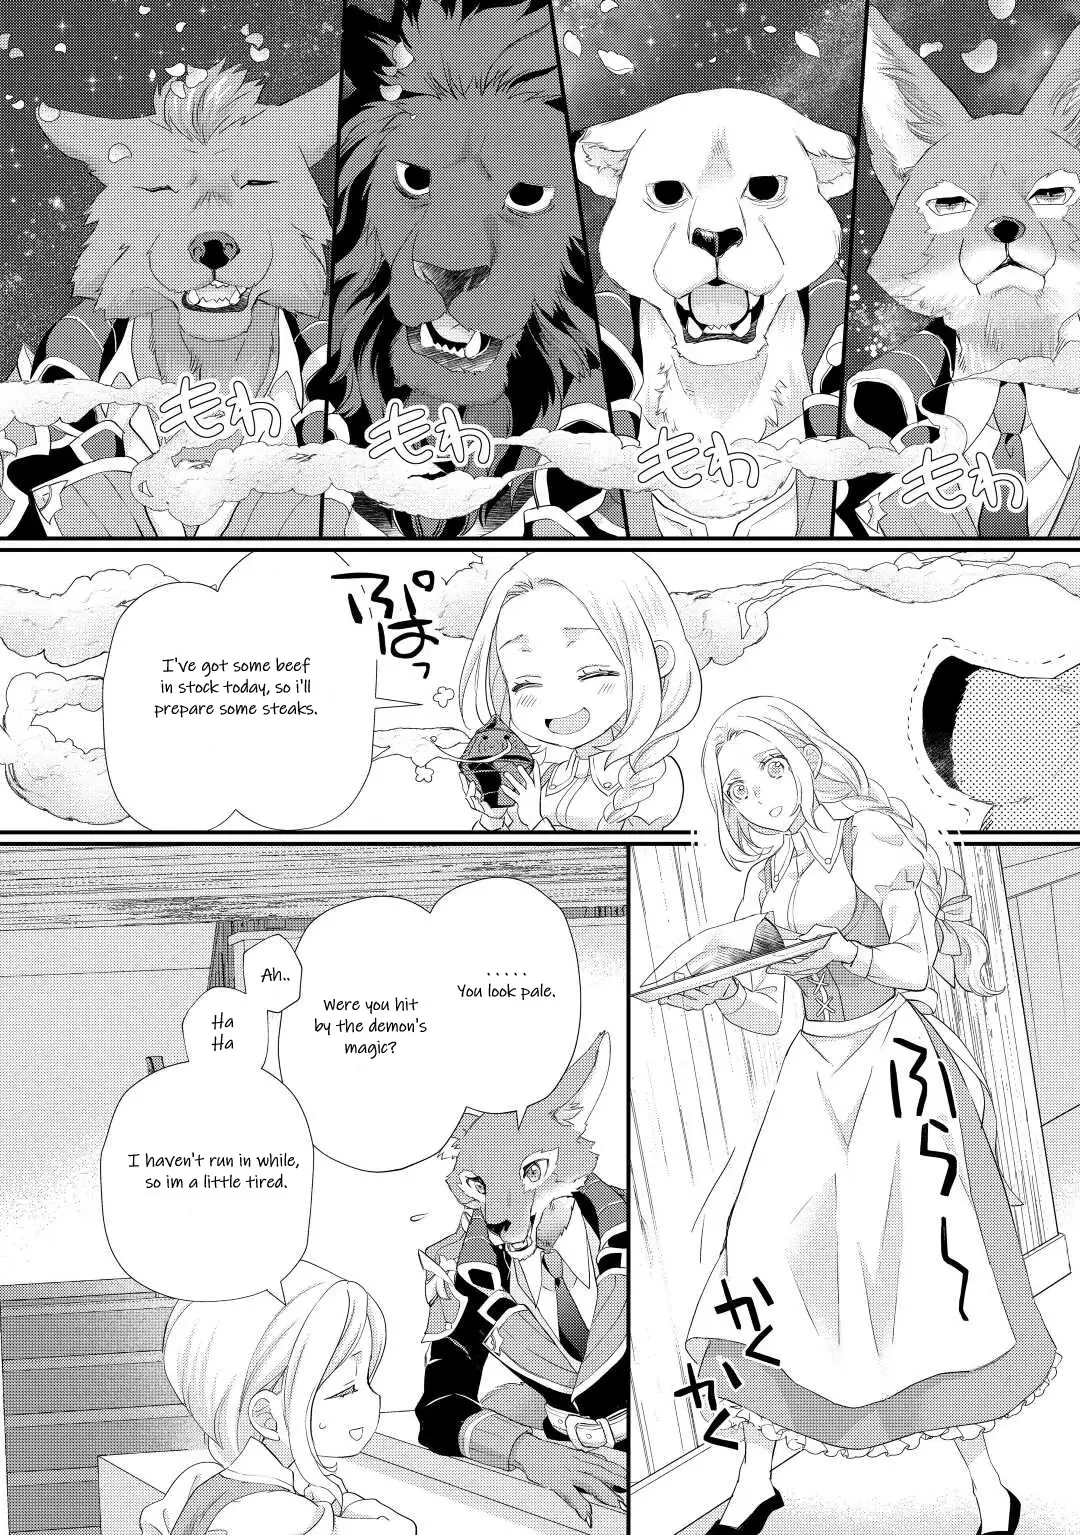 Milady Just Wants to Relax - 34 page 4-16b7807c